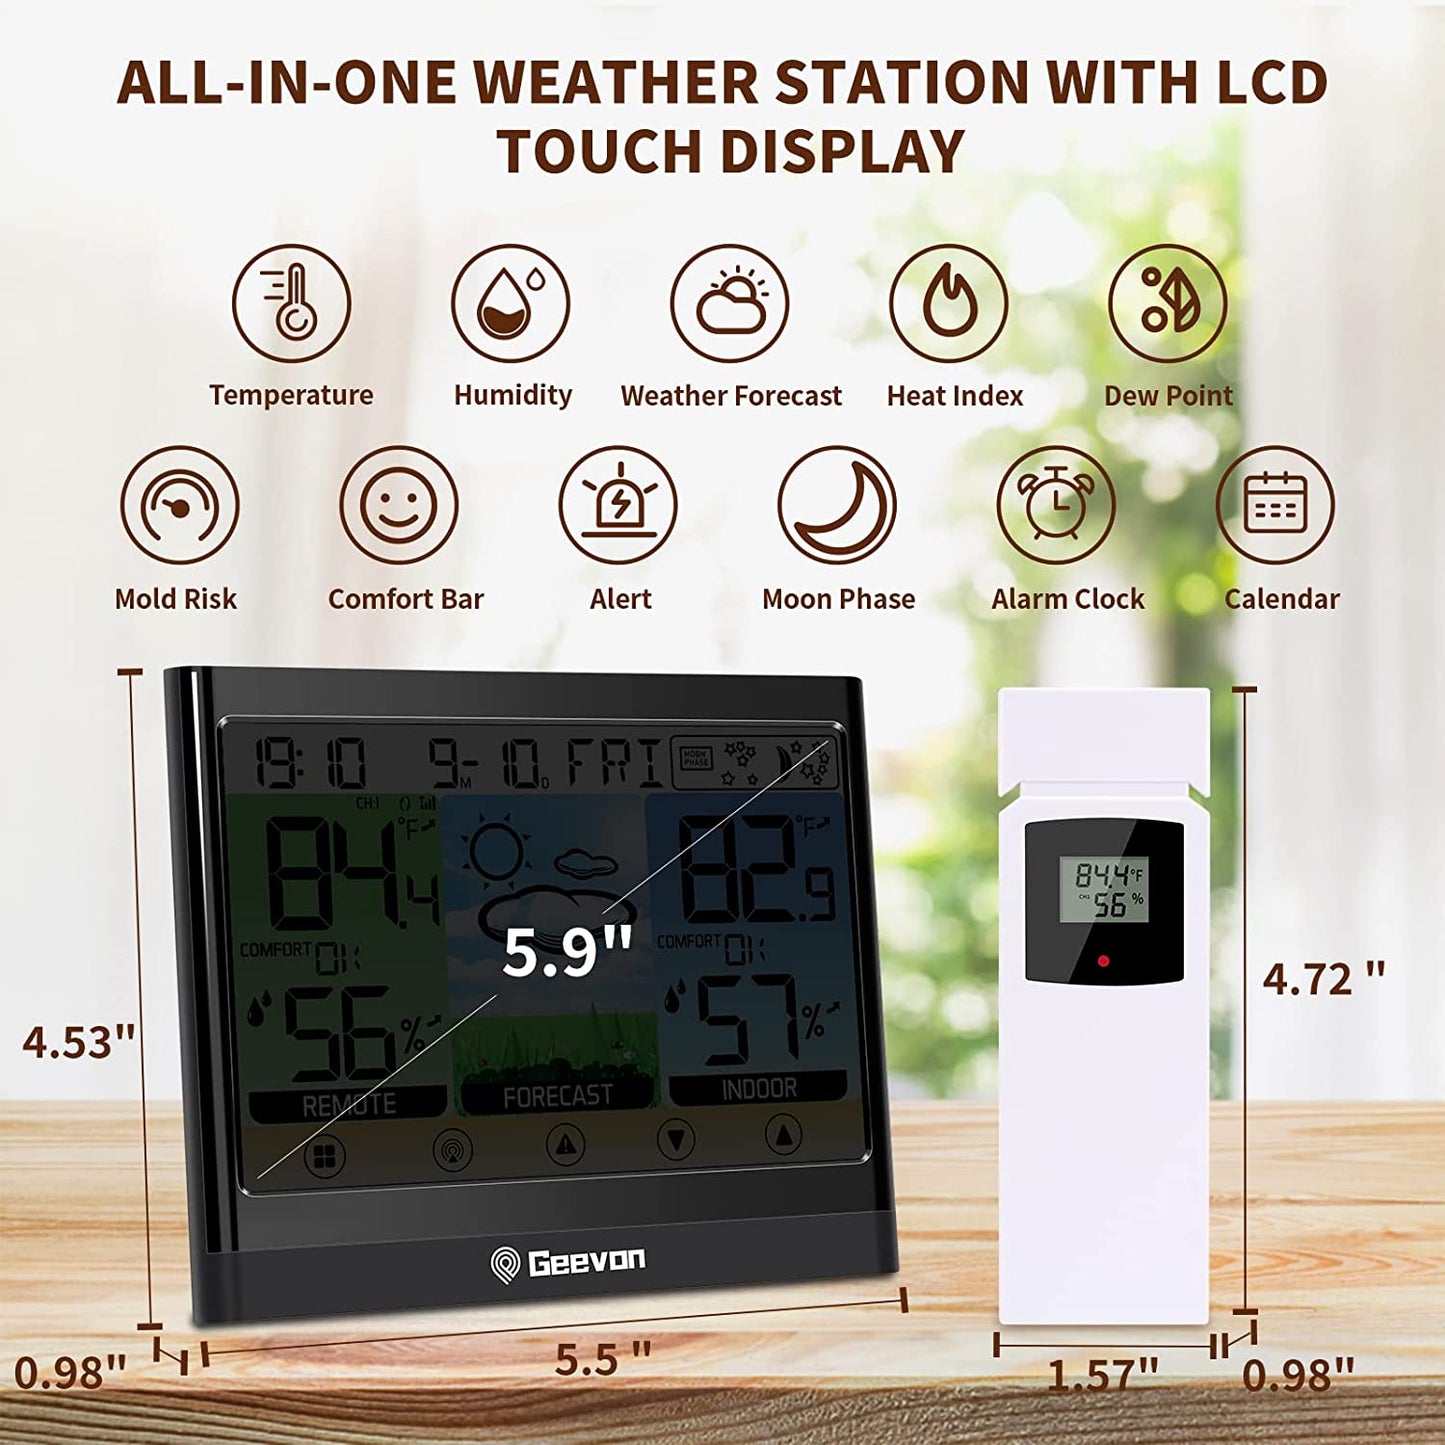 Geevon Weather Station Wireless Indoor Outdoor Thermometer Hygrometer with Heat Index, Dew Point, Touch LCD Display Digital Forecast Station with Alarm Clock and Adjustable Backlight